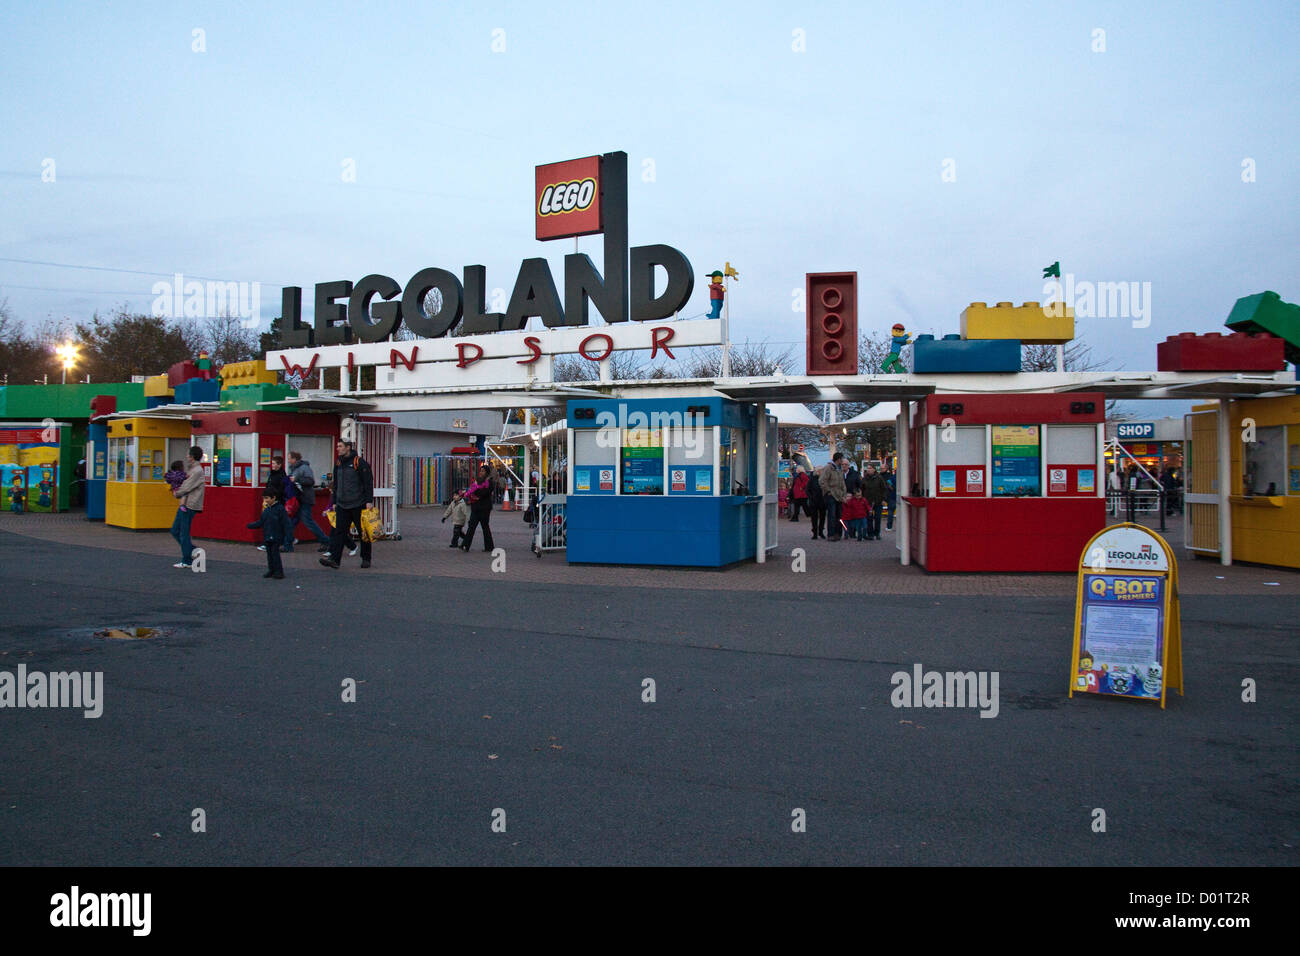 Page 3 - Lego Land High Resolution Stock Photography and Images - Alamy